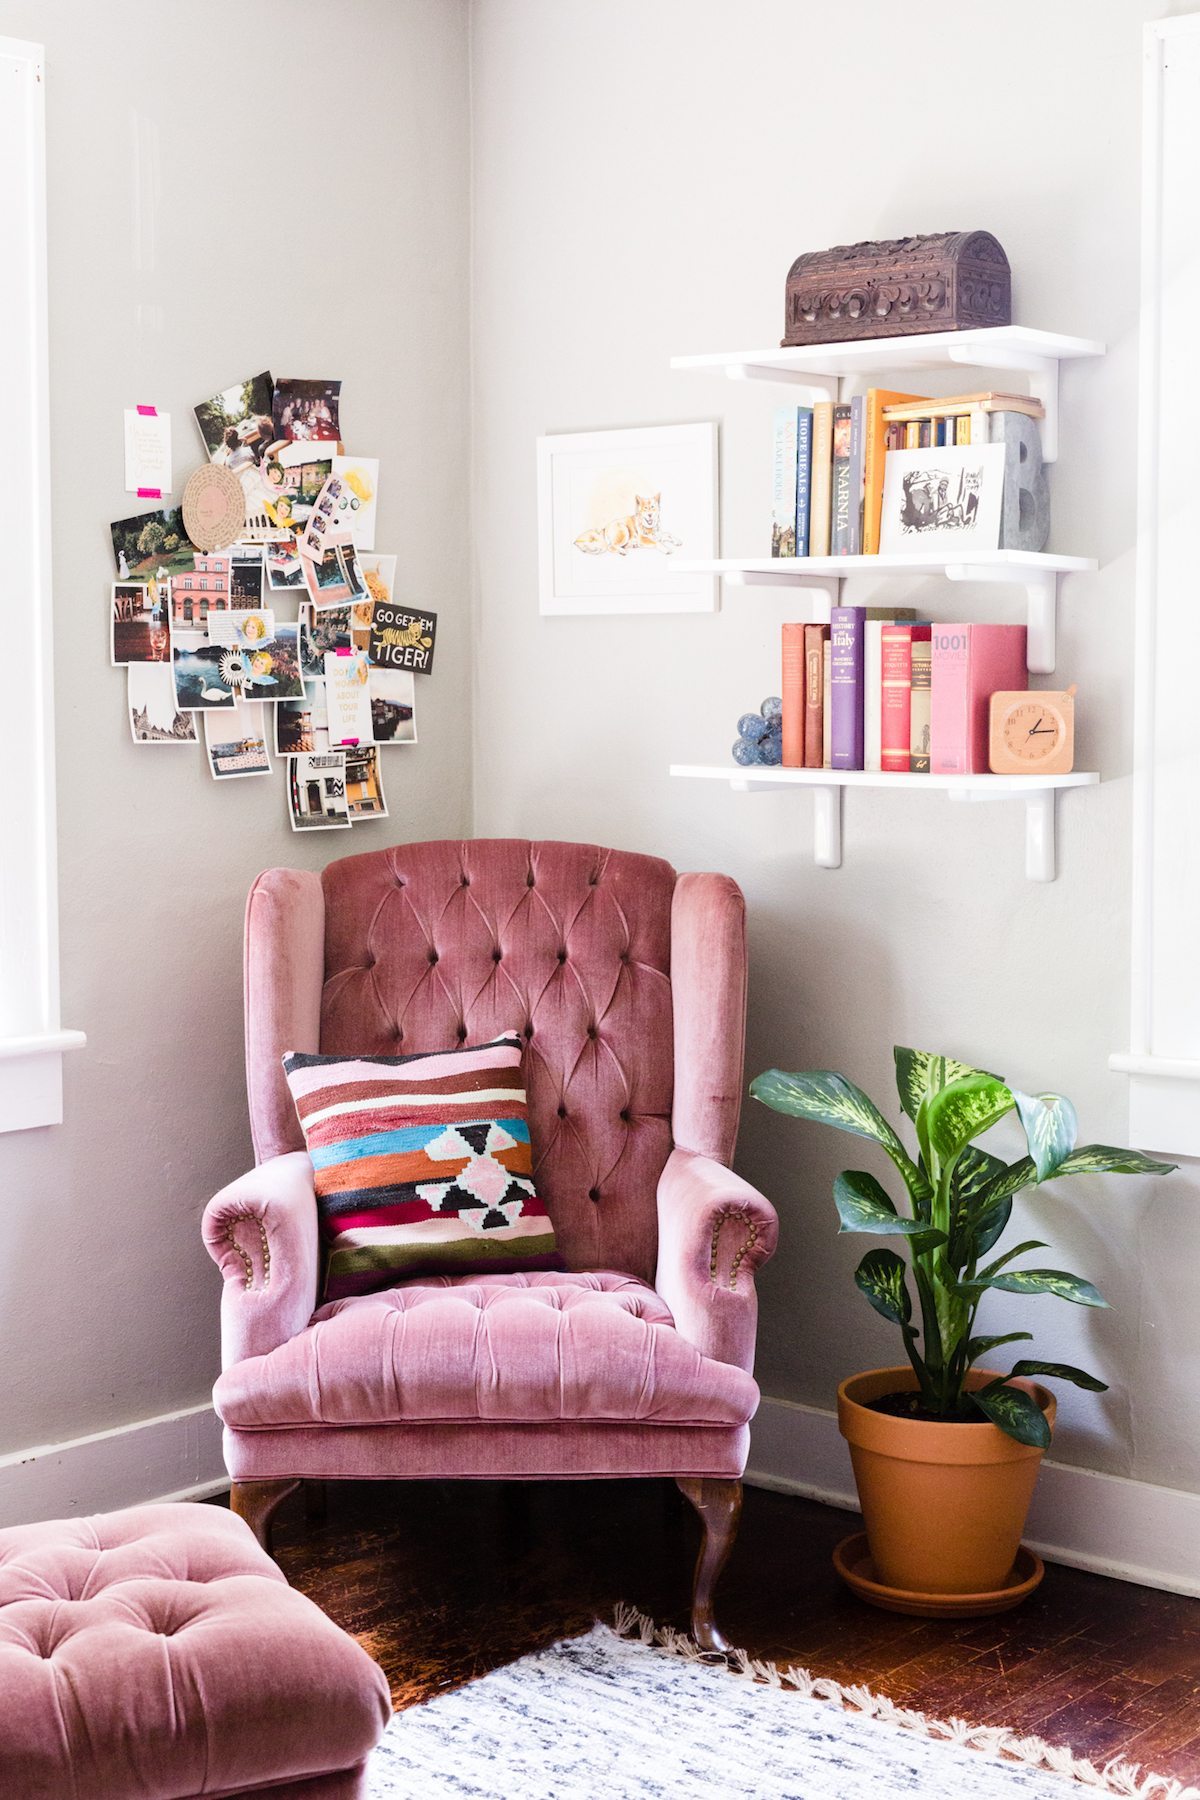 A-pastel-pink-armchair-for-a-tender-reading-nook-